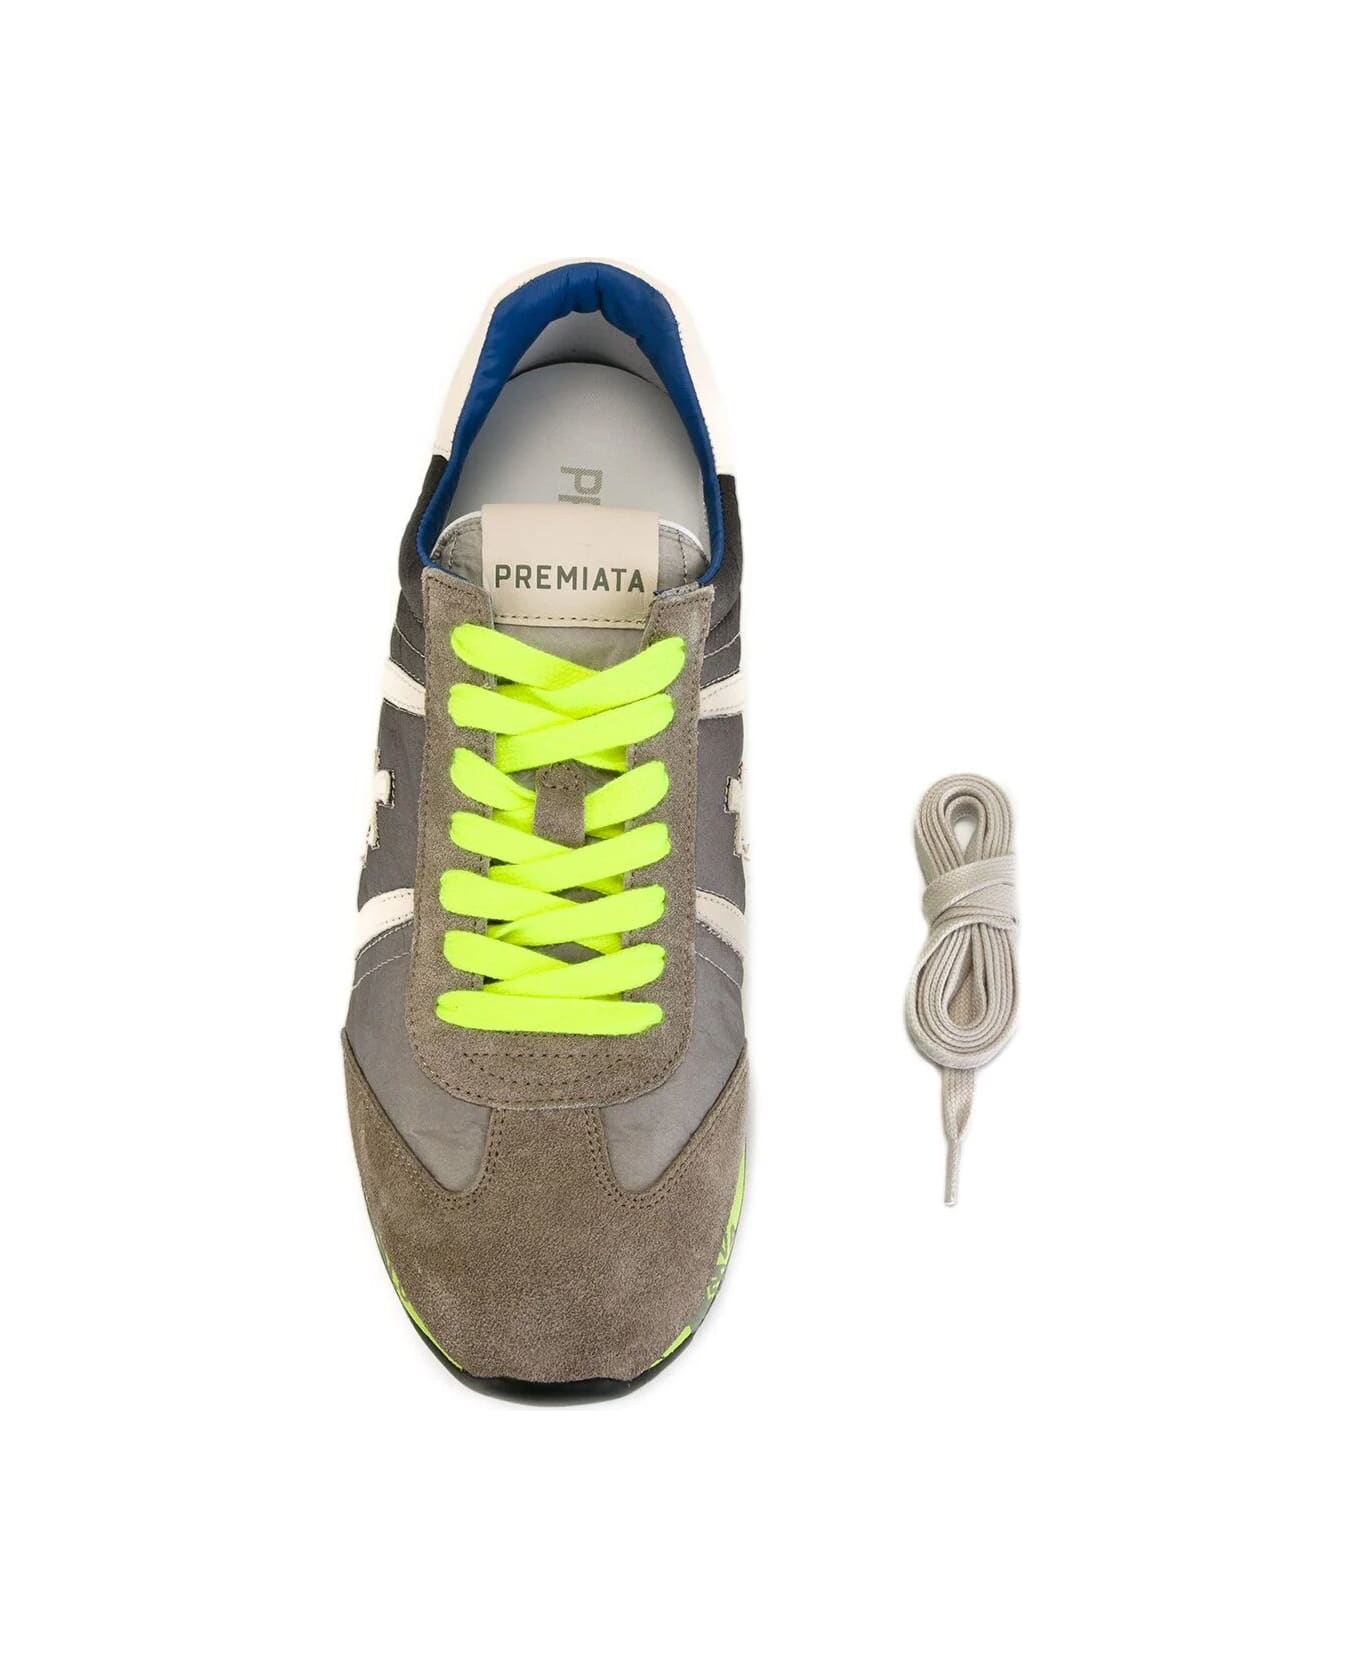 Premiata Lucy Sneakers - Grey Yellow スニーカー